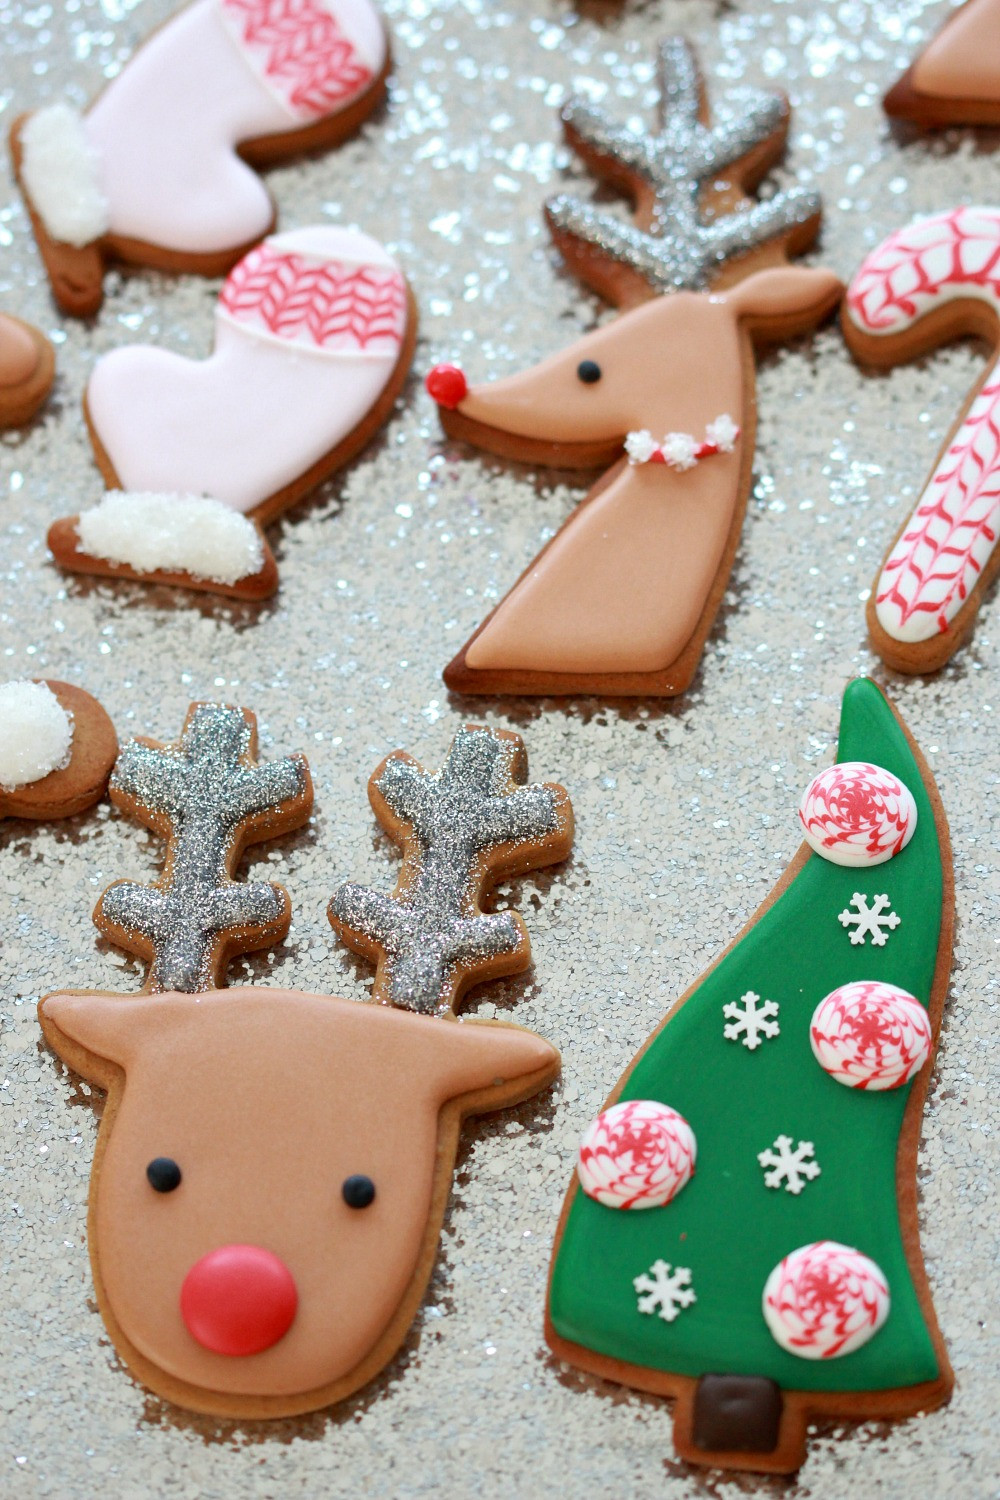 How To Decorate Christmas Cookies
 Video How to Decorate Christmas Cookies Simple Designs